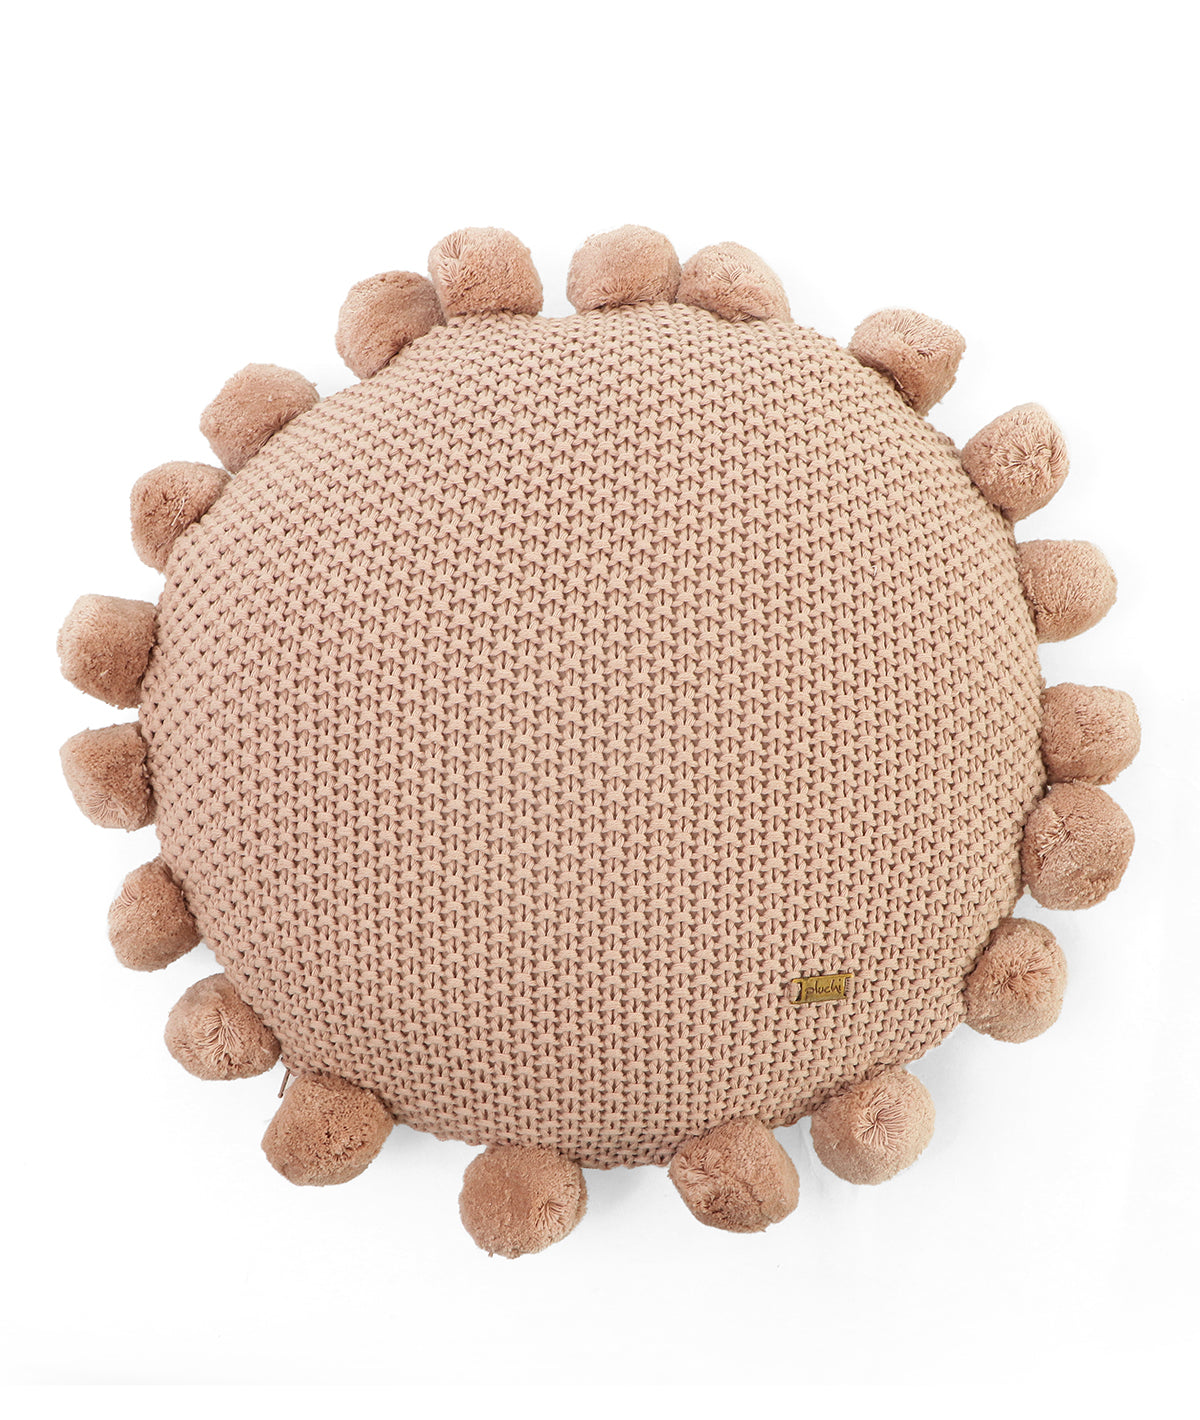 Pom Pom Crepe Cotton Knitted Decorative 16 Inches Dia Cushion Cover